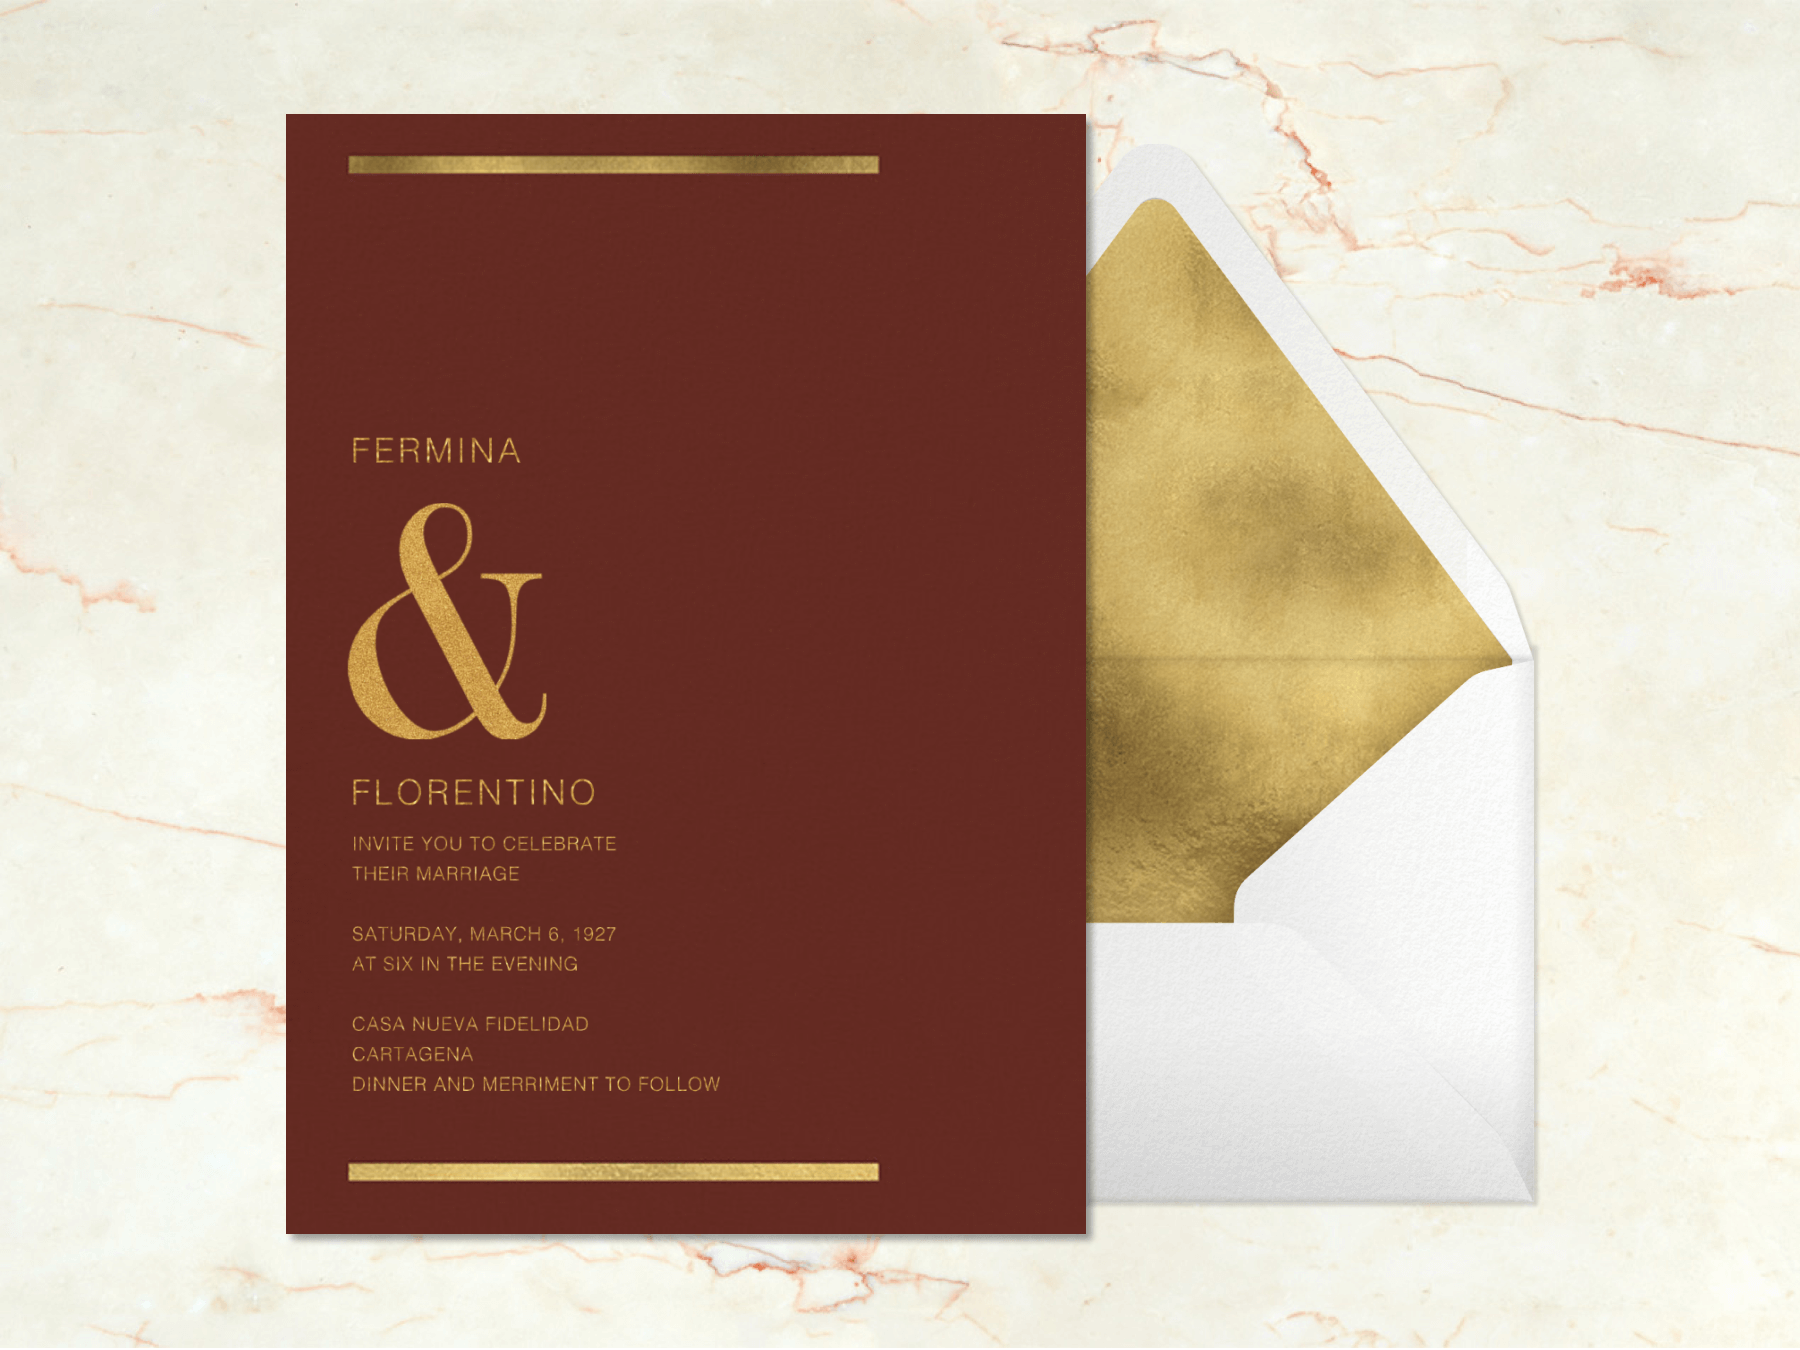 A burgundy wedding invitation with gold lines at the top and bottom and a large gold ampersand between the couple’s names beside a white envelope with gold liner on a pink marbled background.